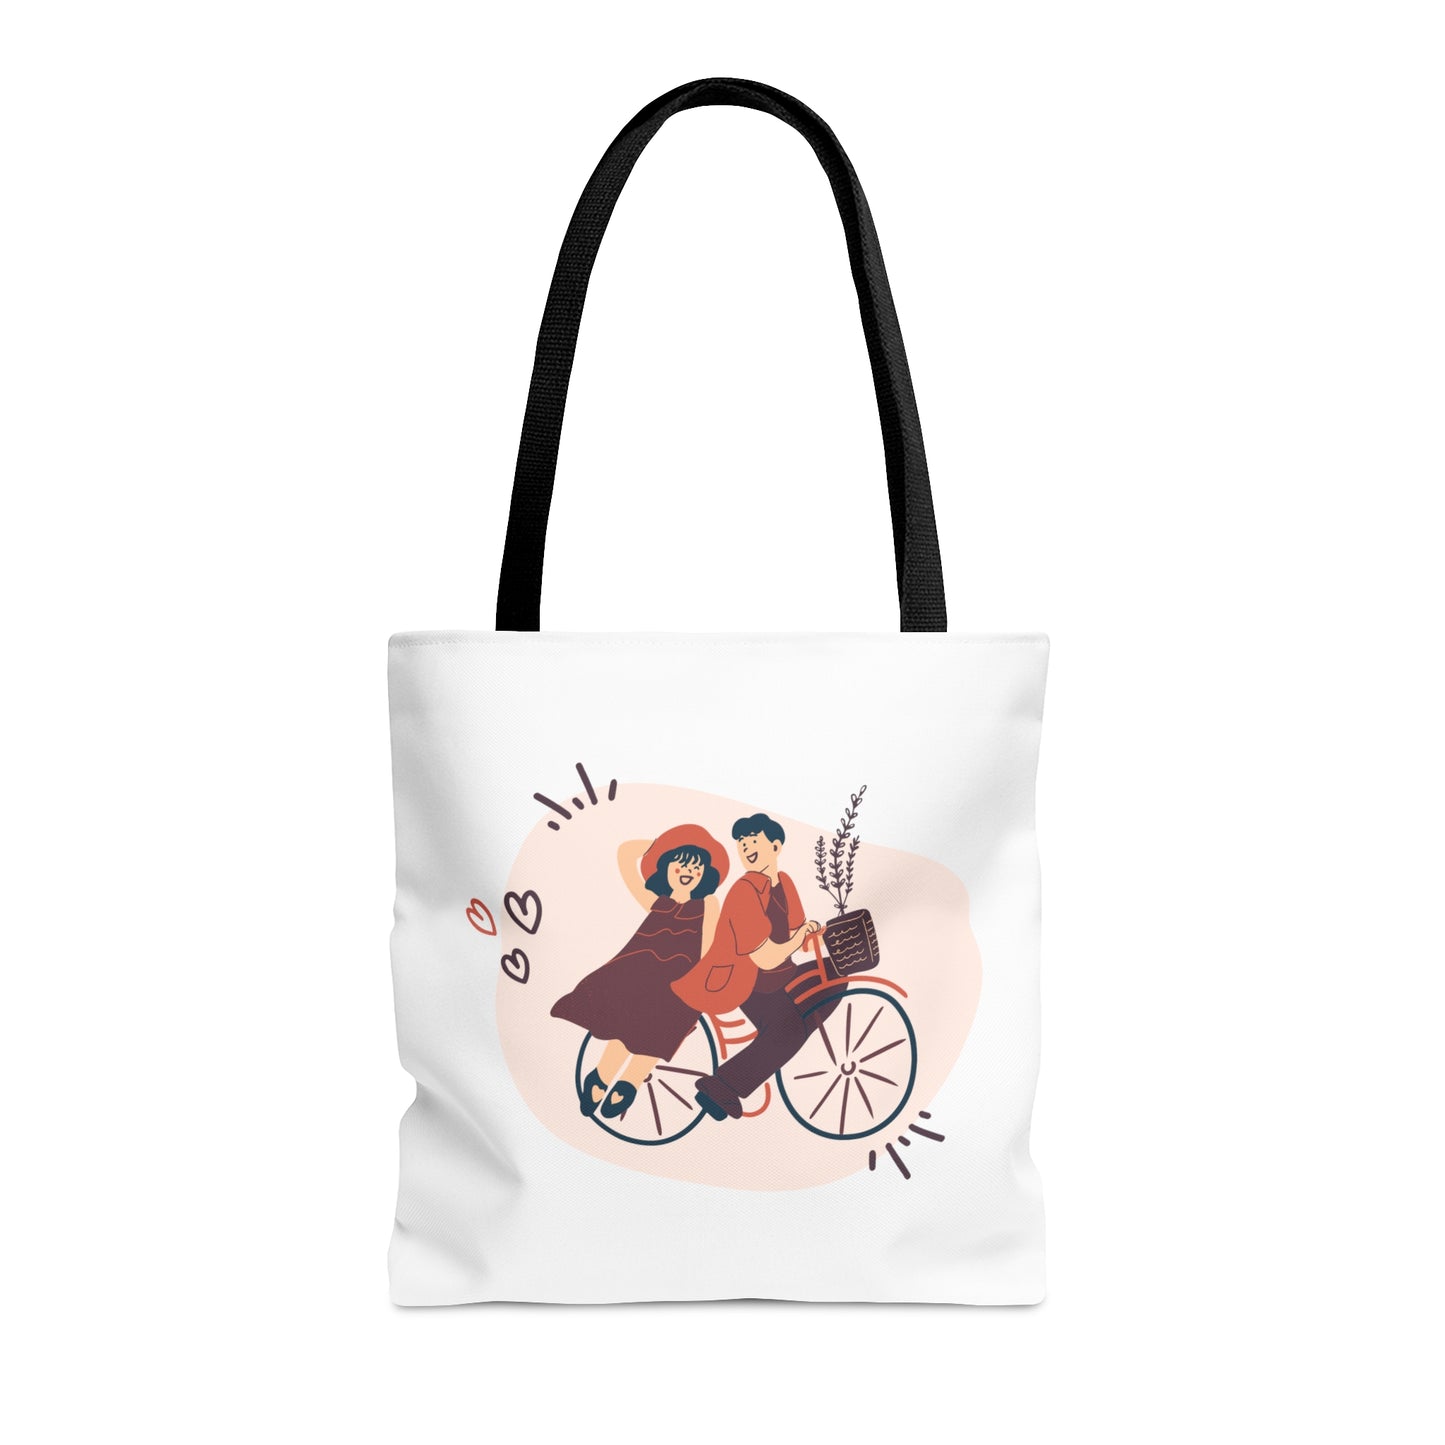 Beautiful Couple on Bike Printed Tote Bag, Reusable Tote Bag for Valentine's Day